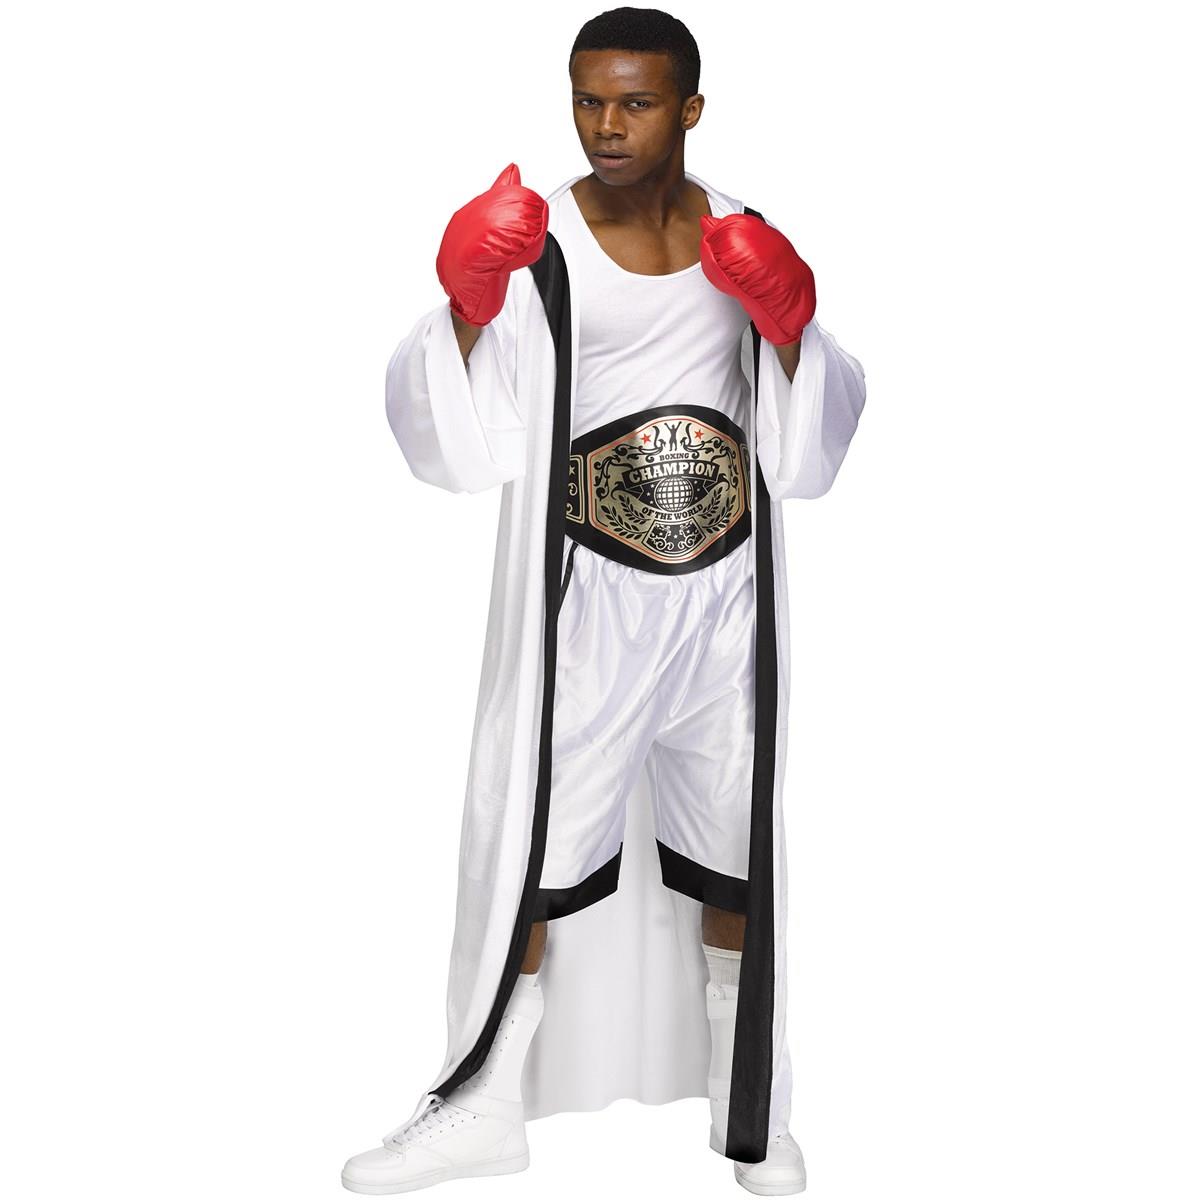 Picture of Charades Costumes 271559 Champ Adult Costume